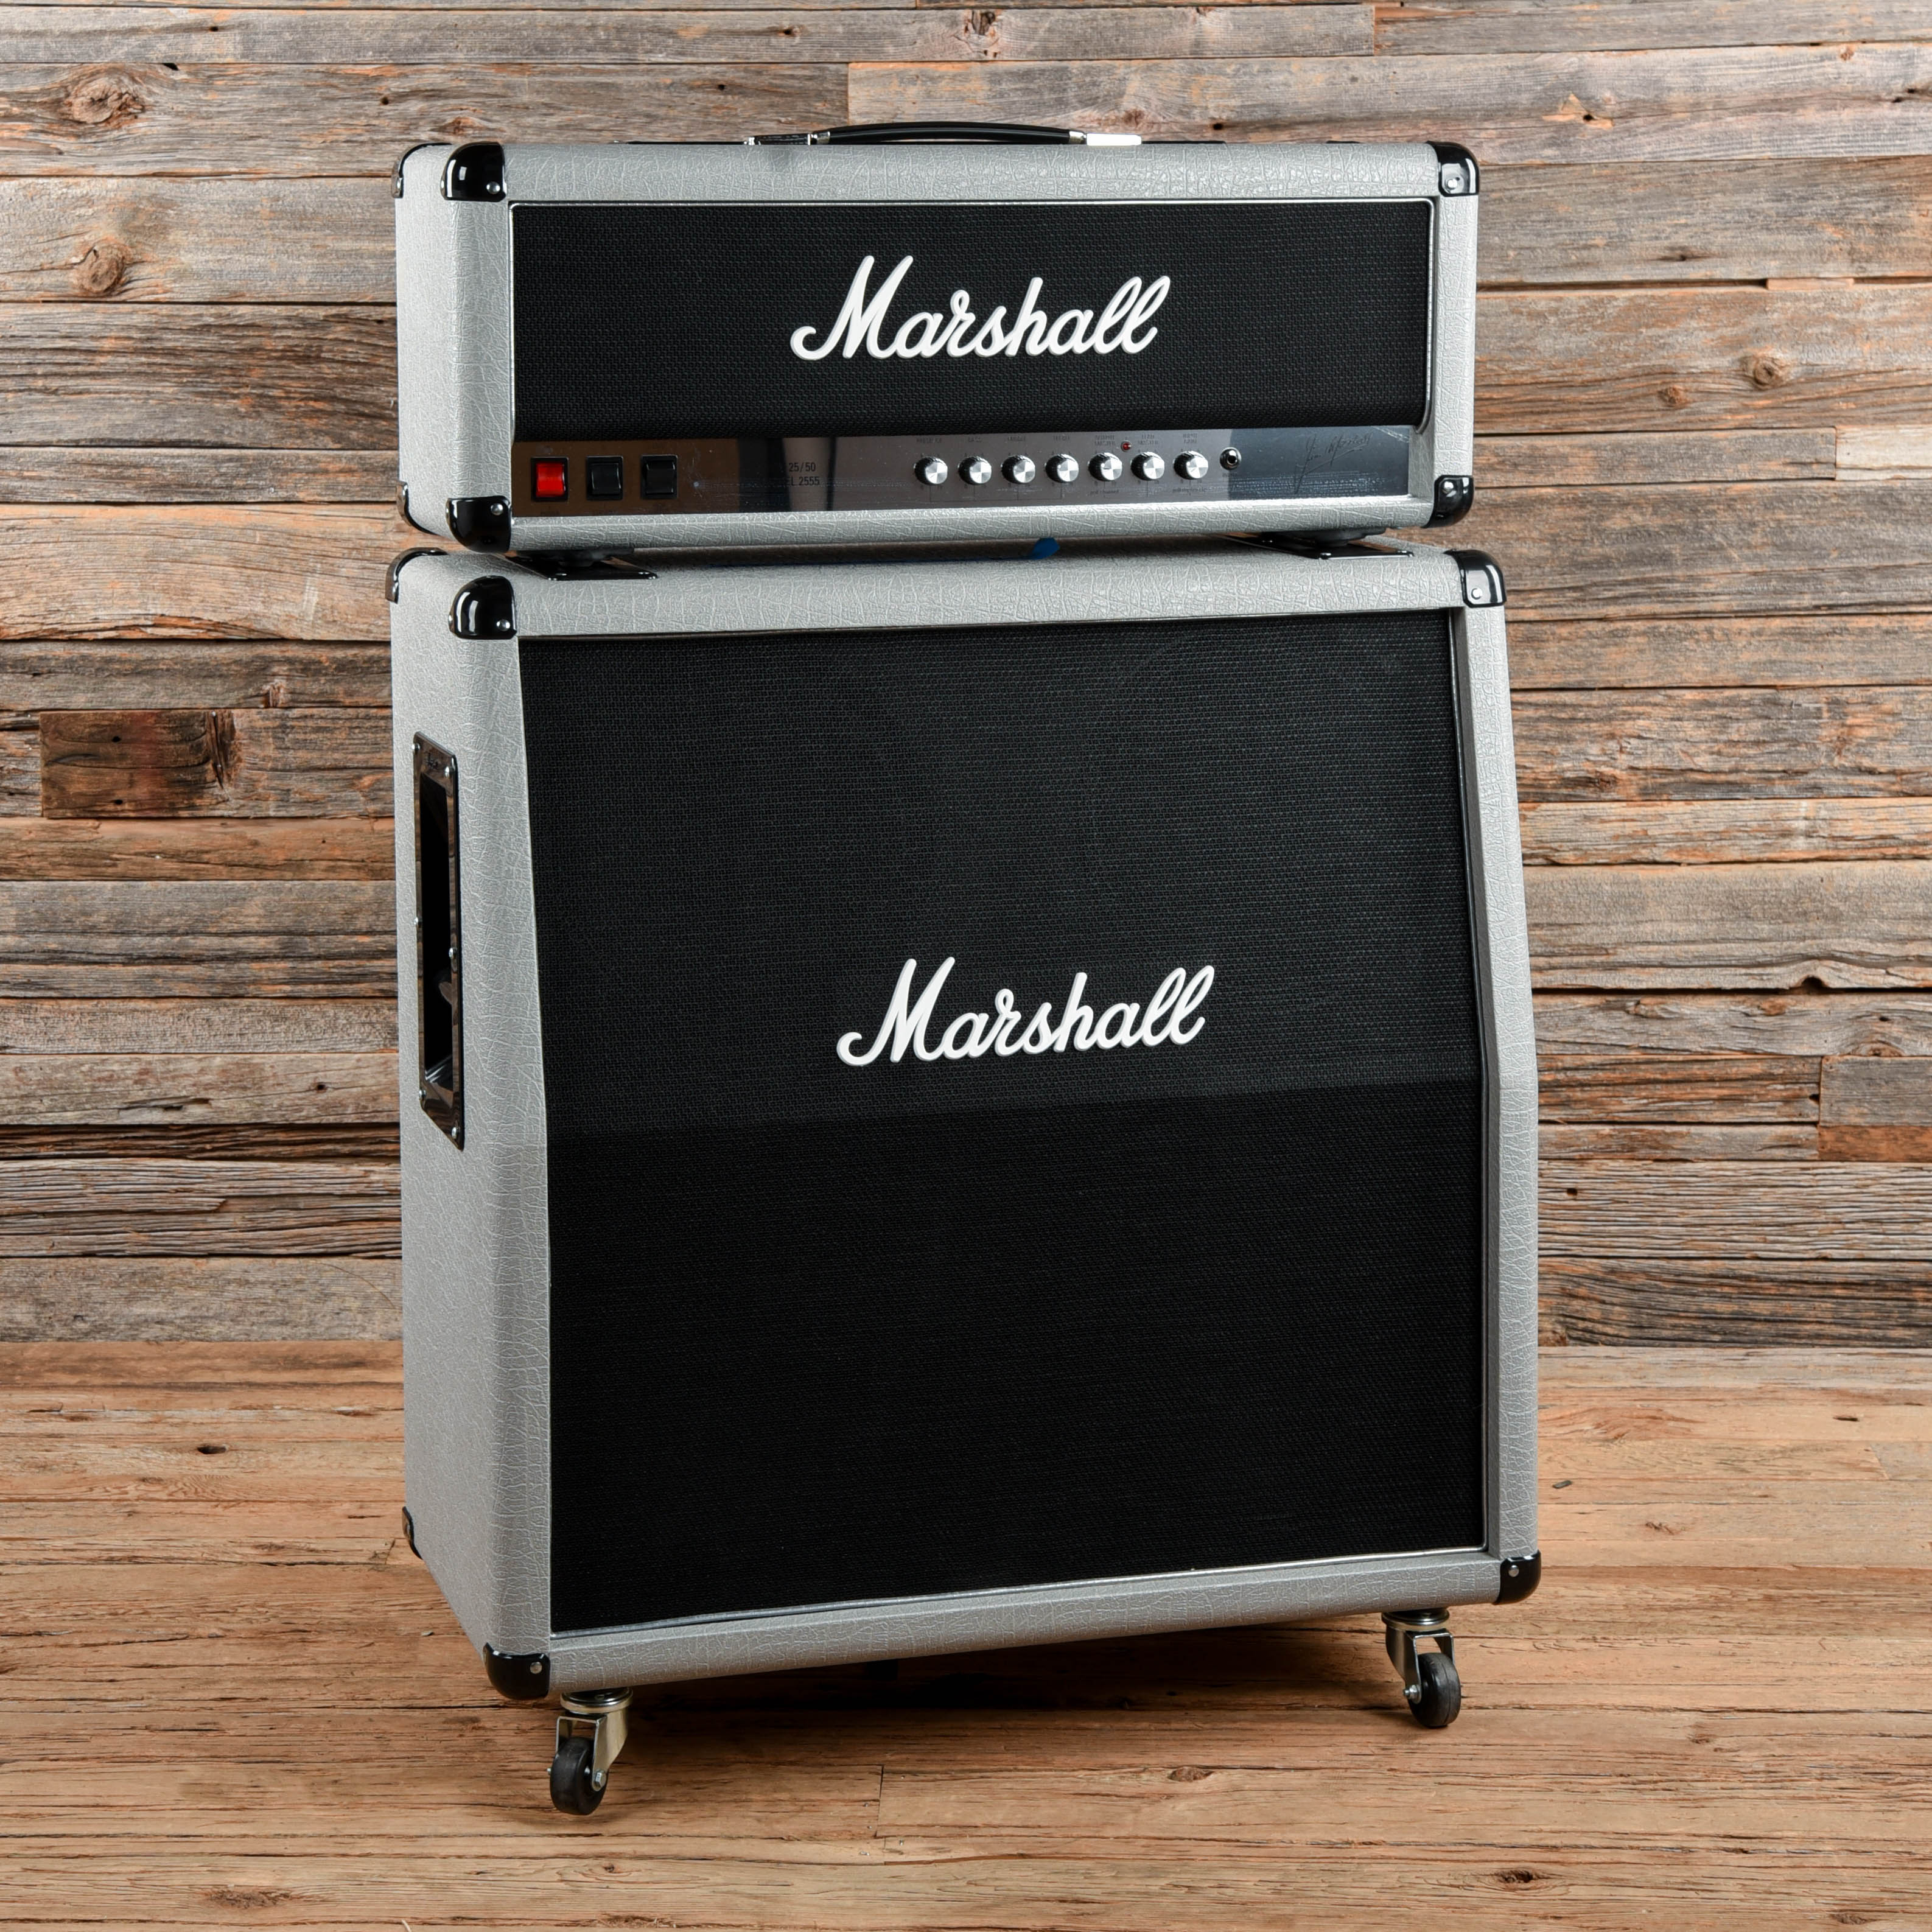 Marshall JCM 25/50 Silver Jubilee Half Stack (Head and 4x12 Cab)